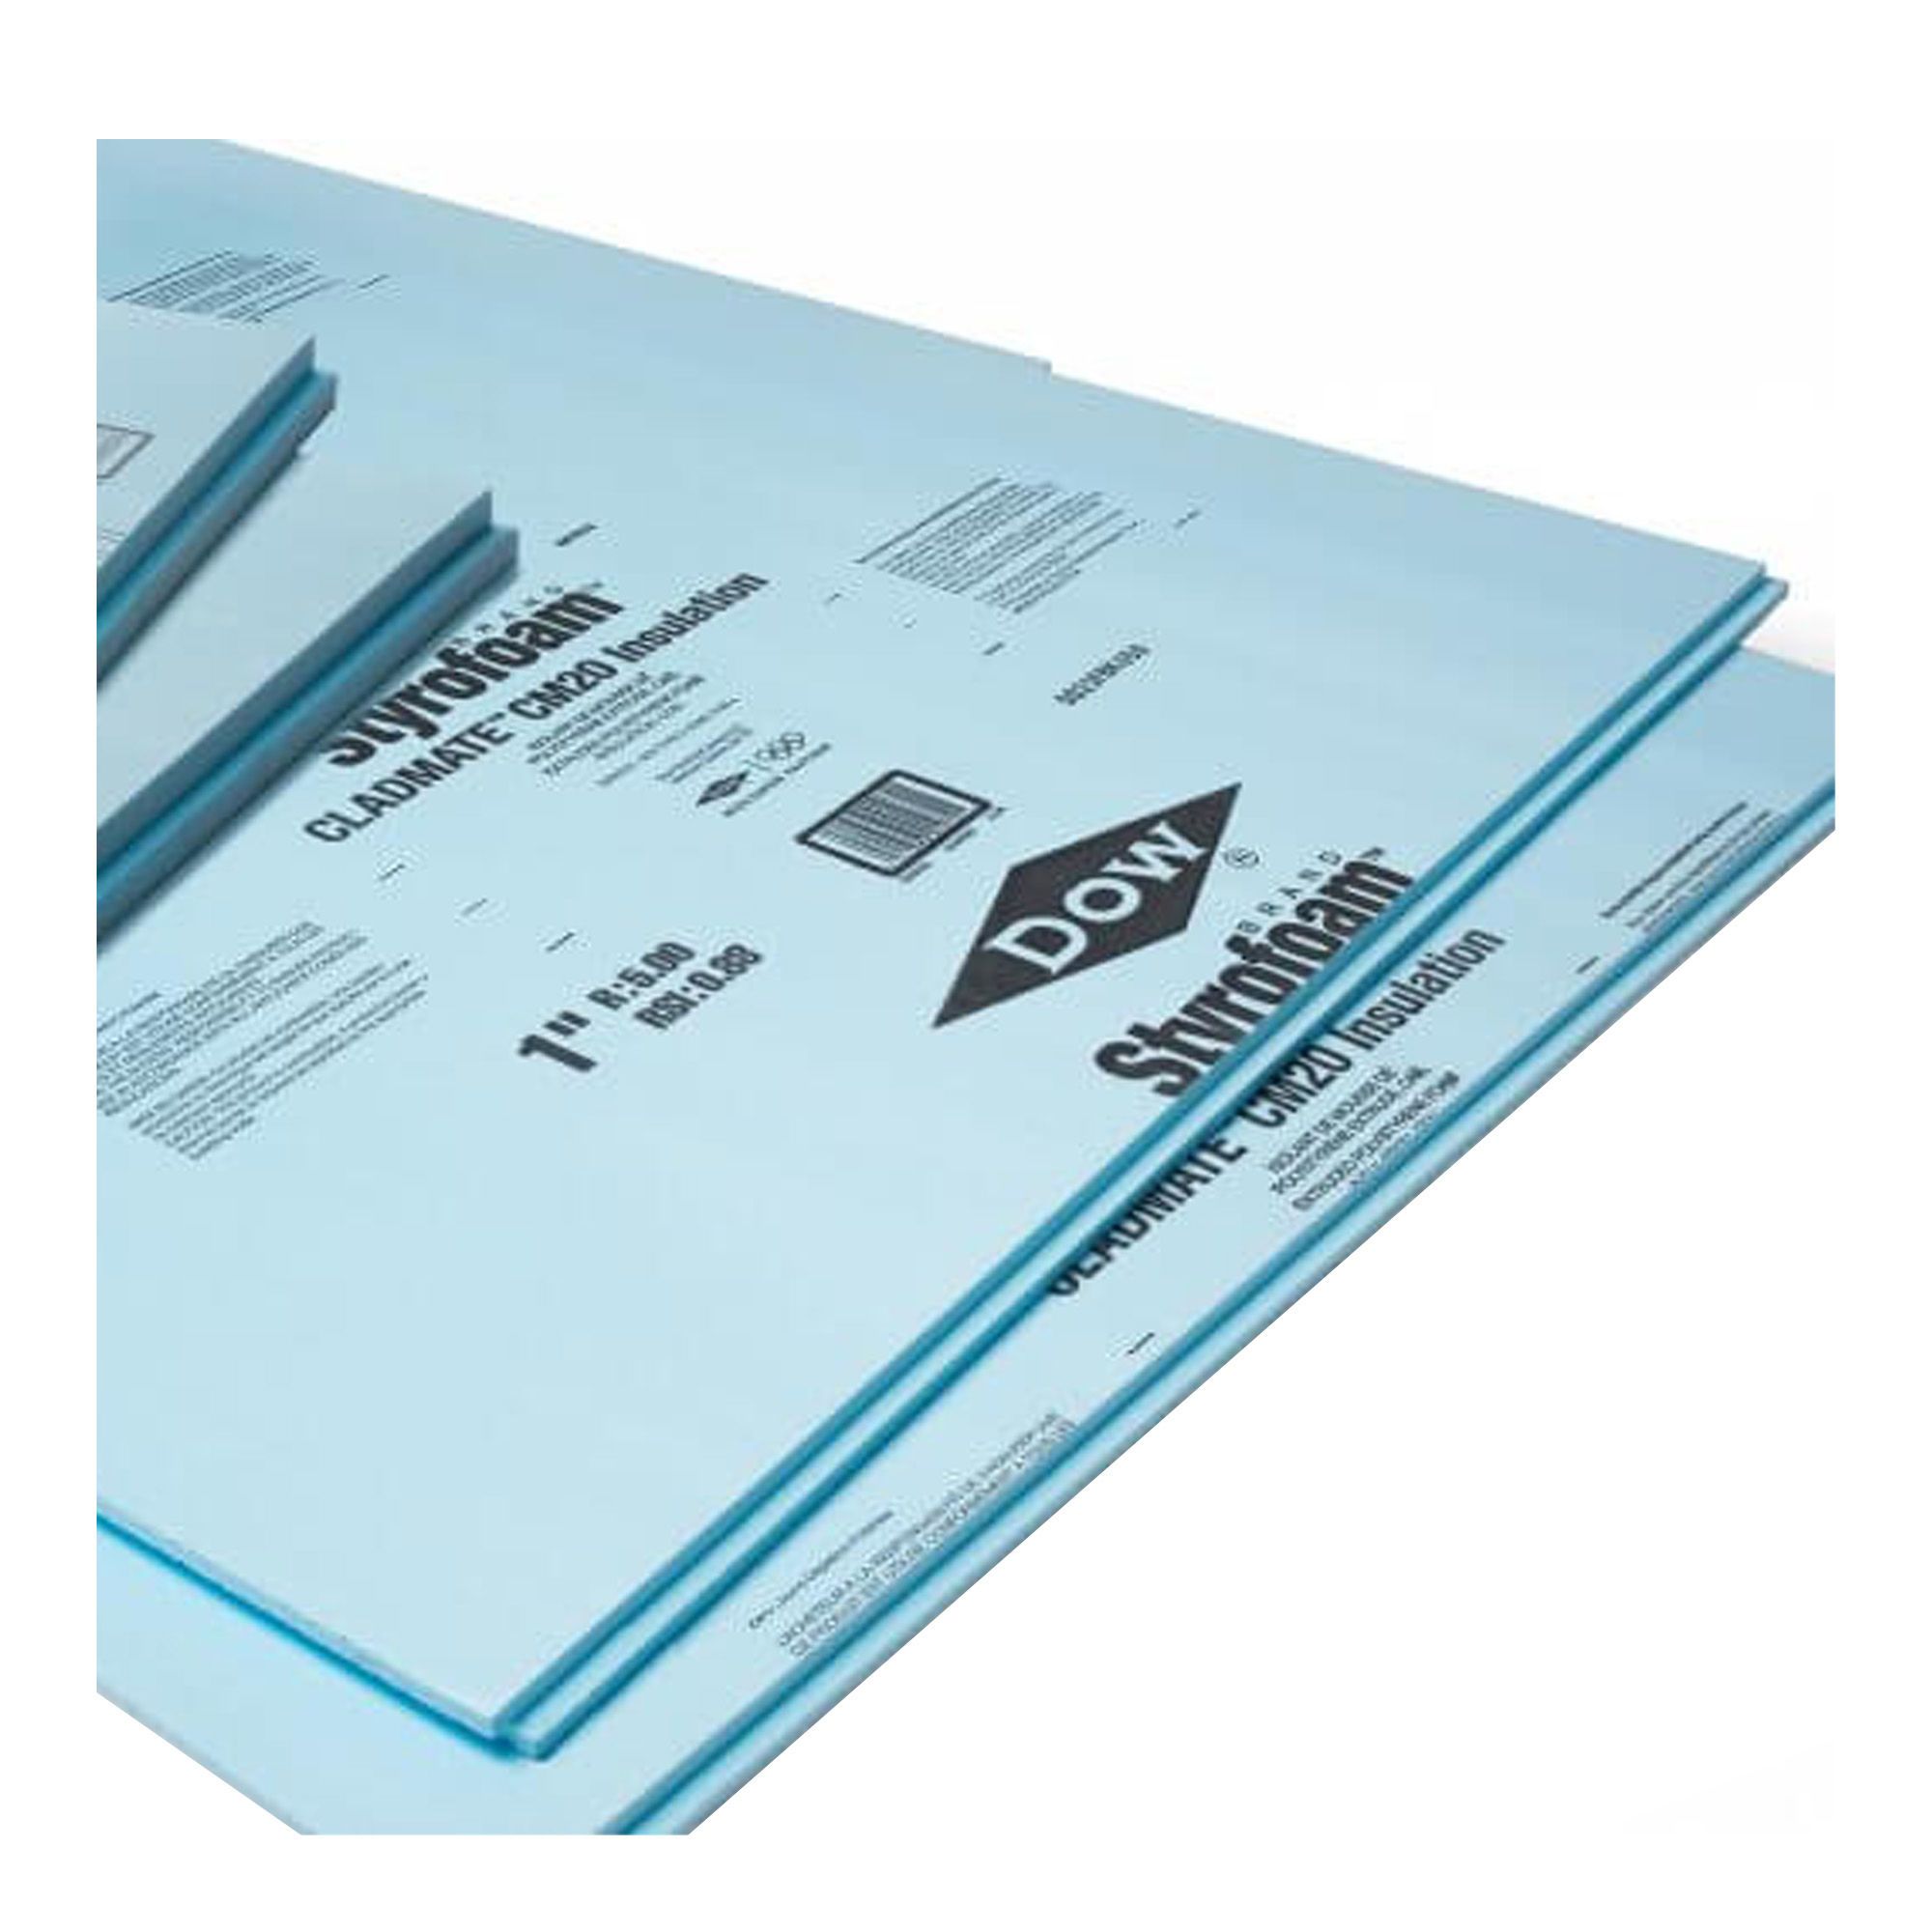 Interior Insulation - Cladmate™ CM20 from DuPont